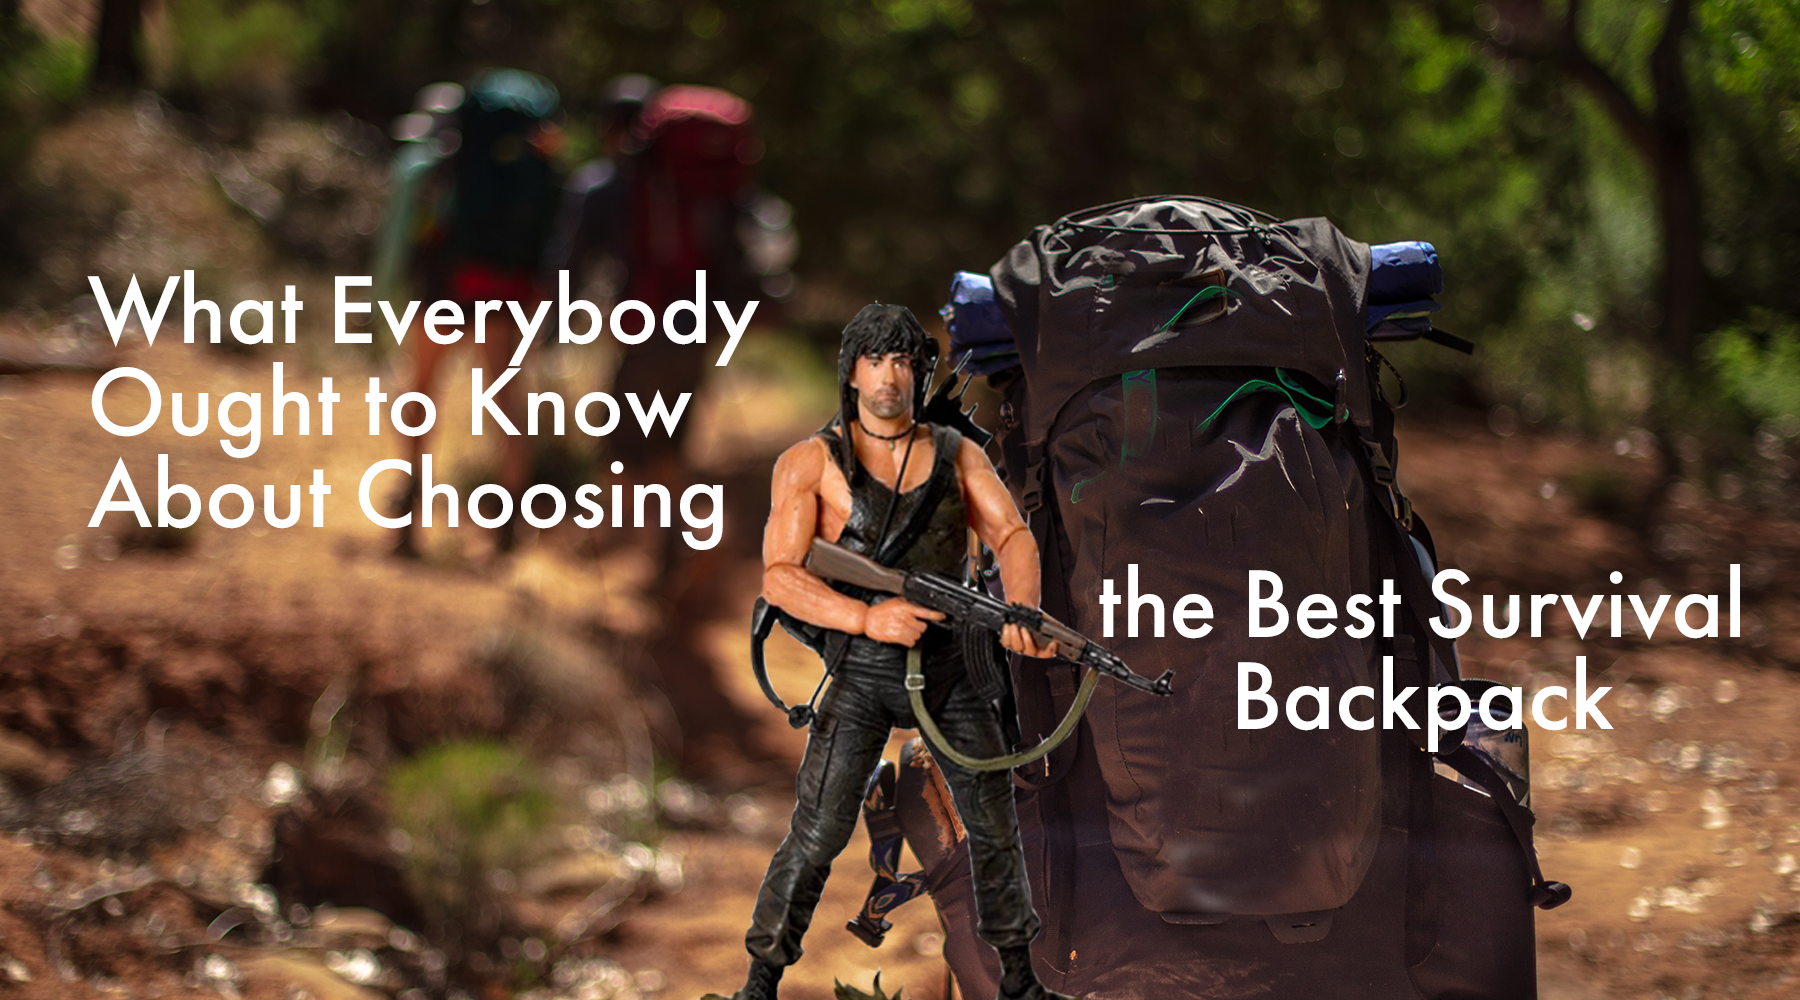 What Everybody Ought to Know About Choosing the Best Survival Backpack